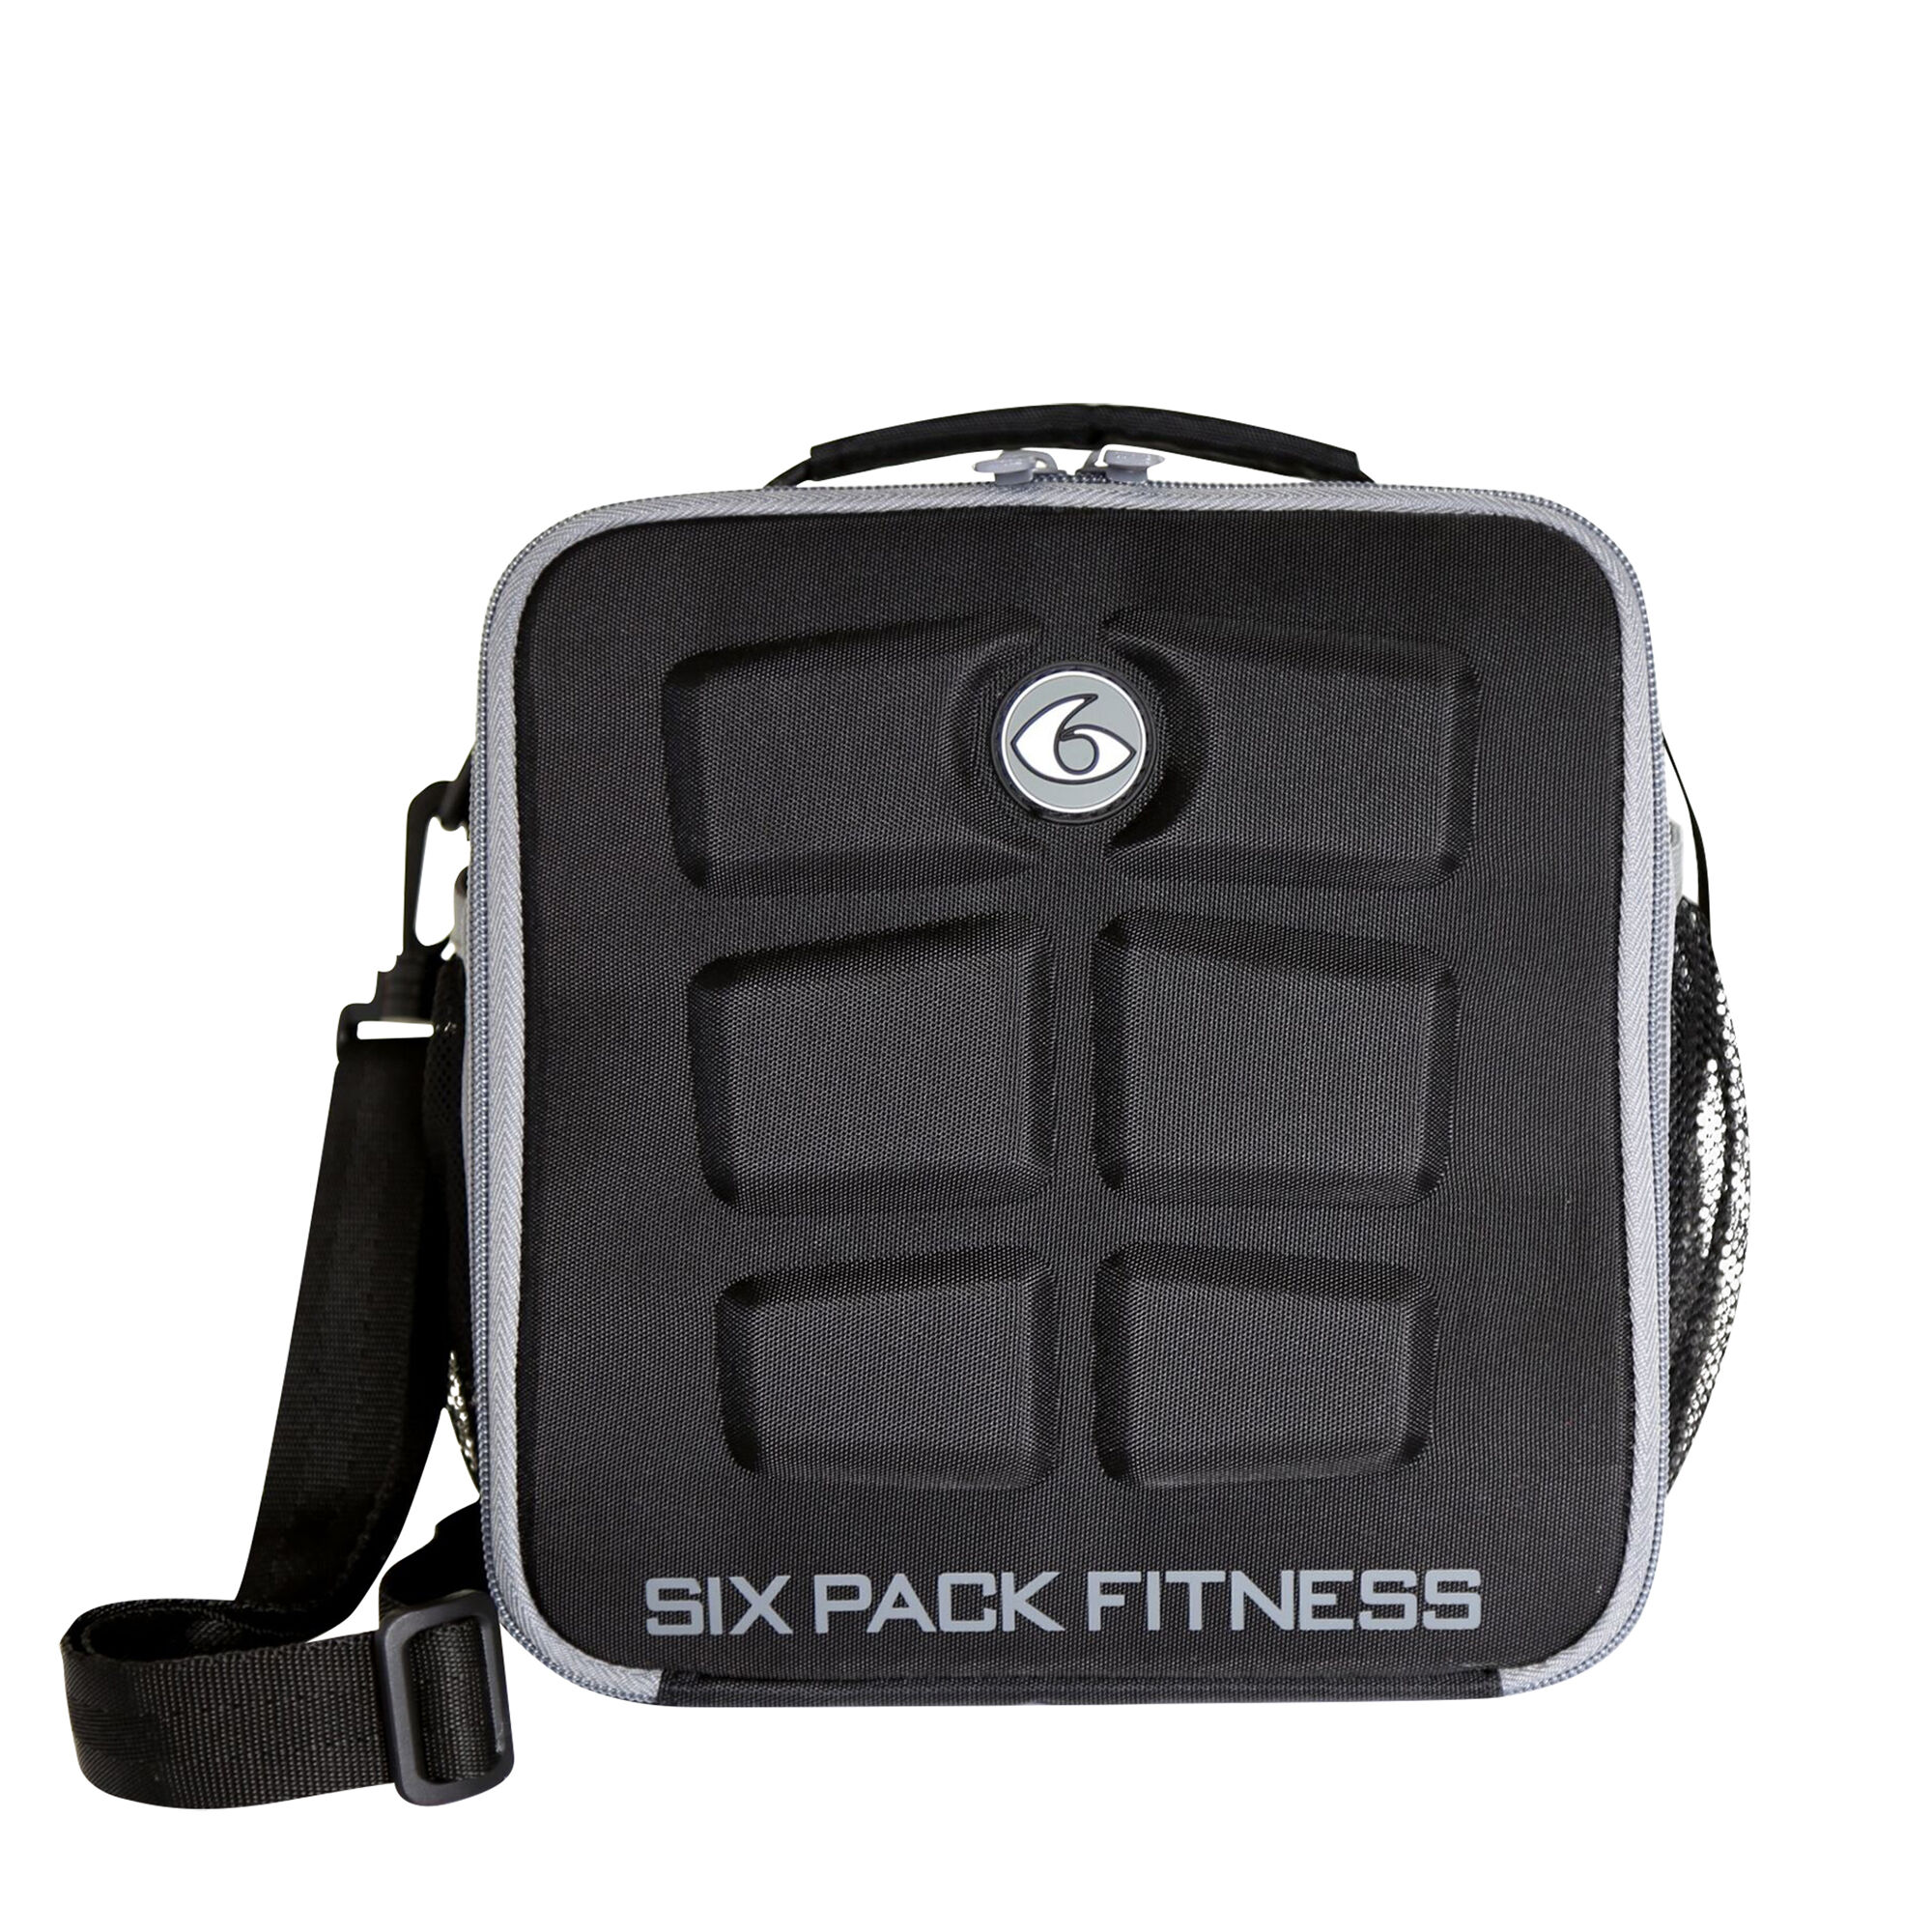 6 Pack Fitness The Cube Meal Management Bag Gray/Black 